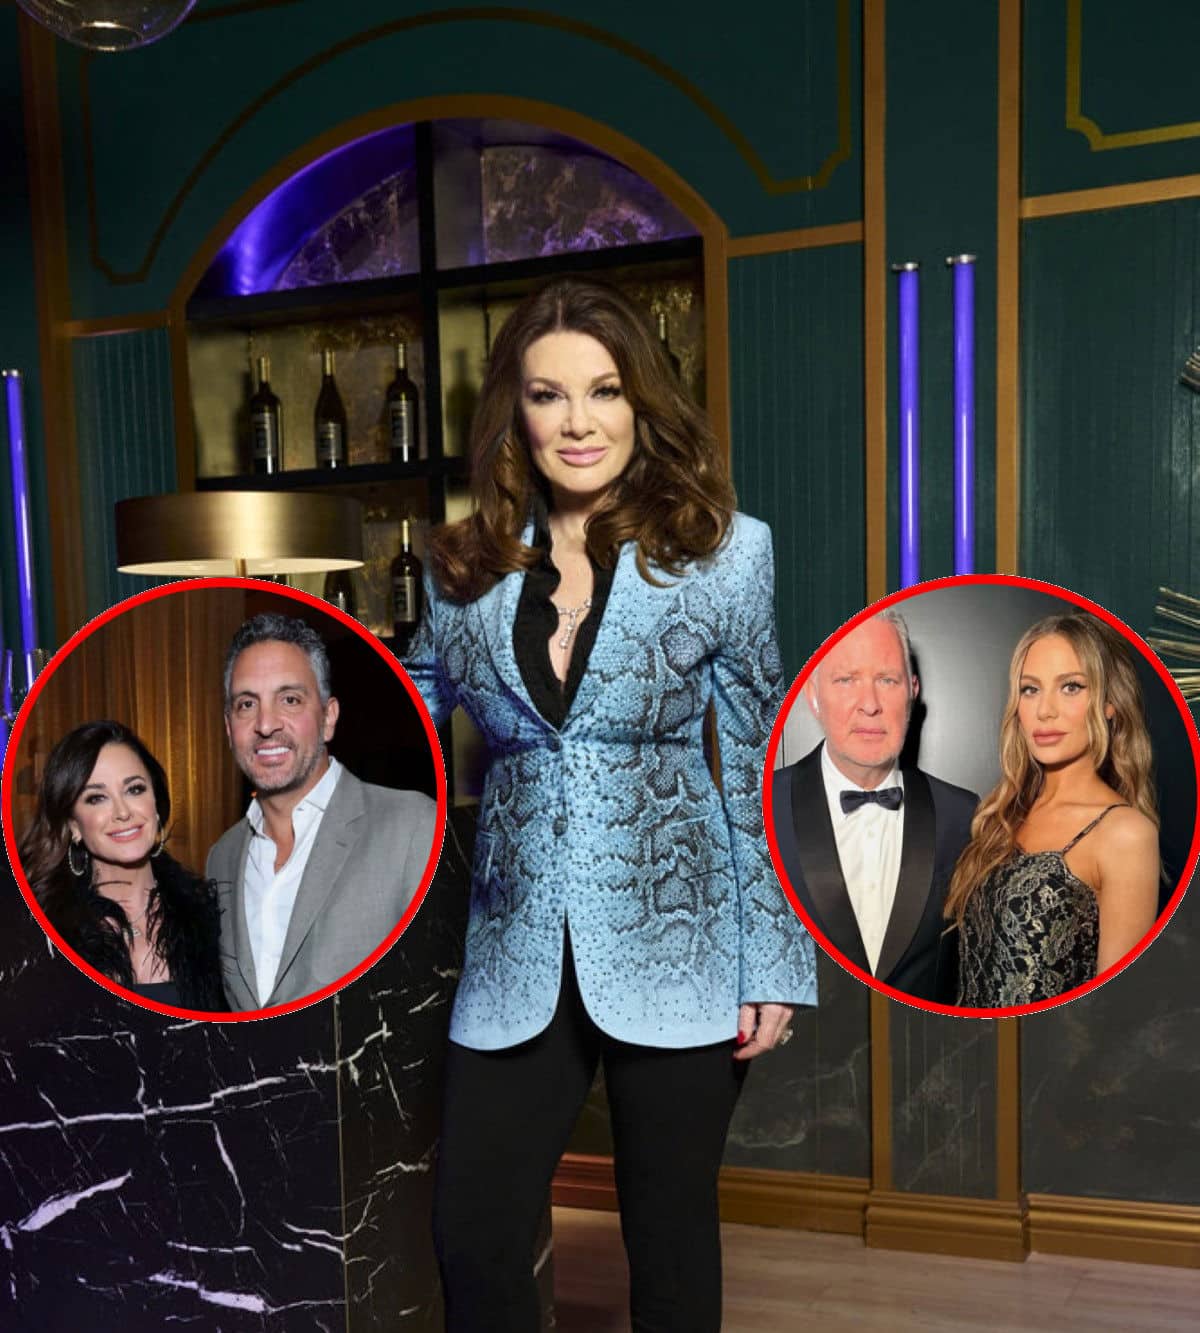 Lisa Vanderpump Confirms She Knew a Costar’s Partner Was Cheating Amid Kyle and Dorit's Separations, Teases Possible Vanderpump Rules Cast Revamp, and Names Who Reminds Her of Herself